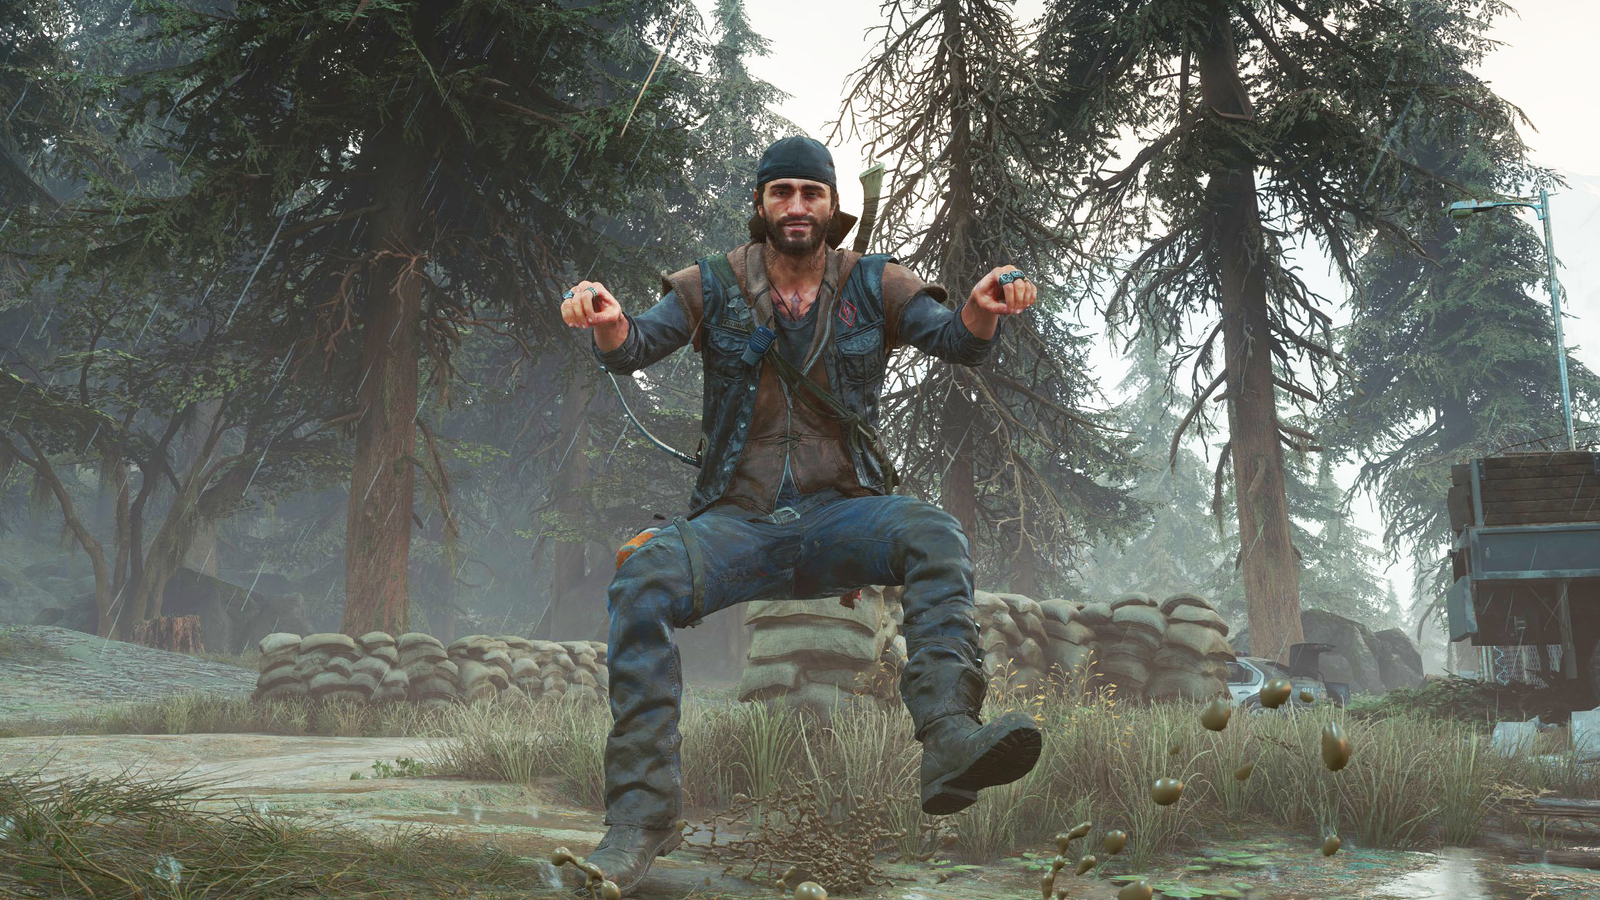 Is Days Gone 2 in development for PlayStation 5?